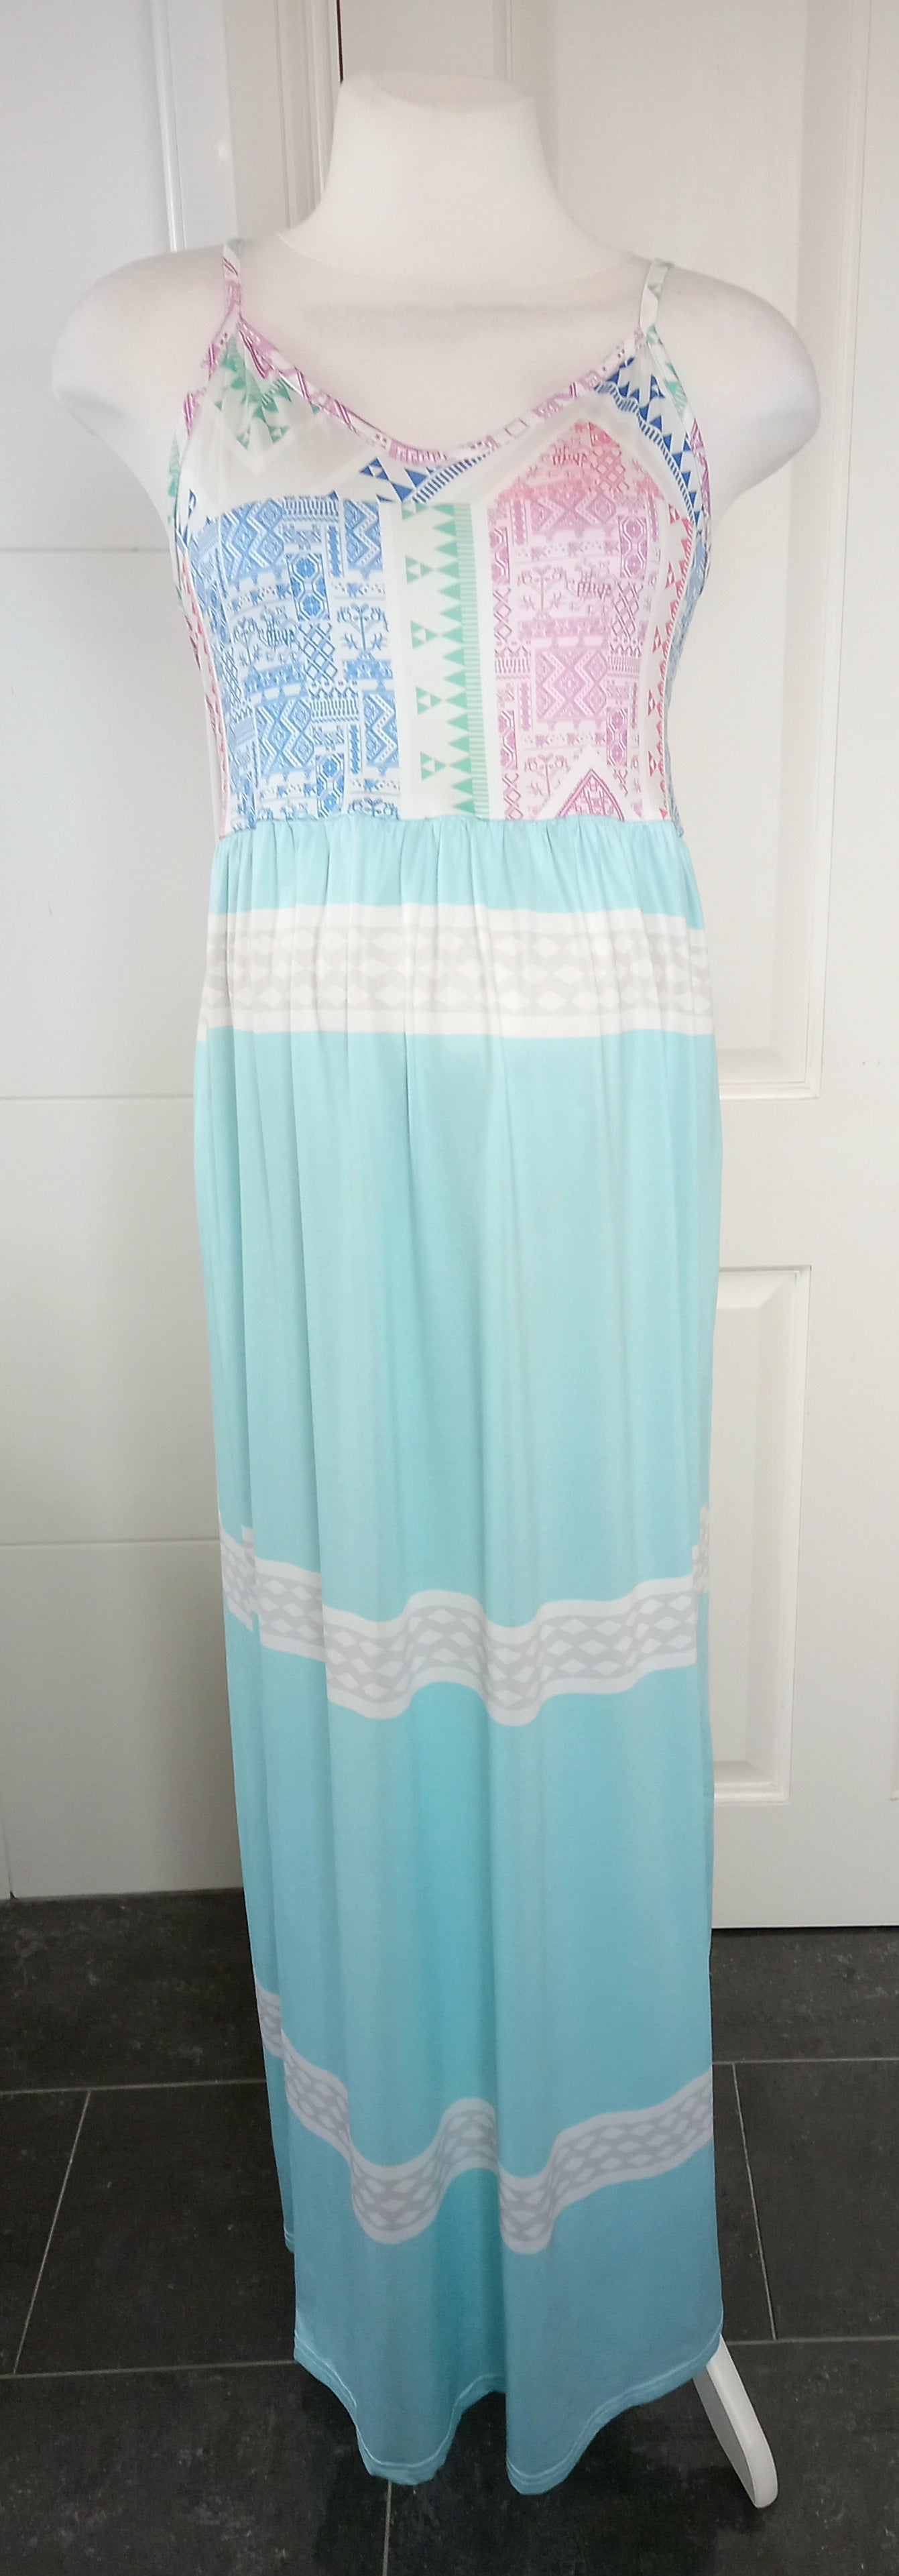 Calladream Blue, PInk & Green Camisole Maxi Dress - Size M (Approx. UK 10/12)